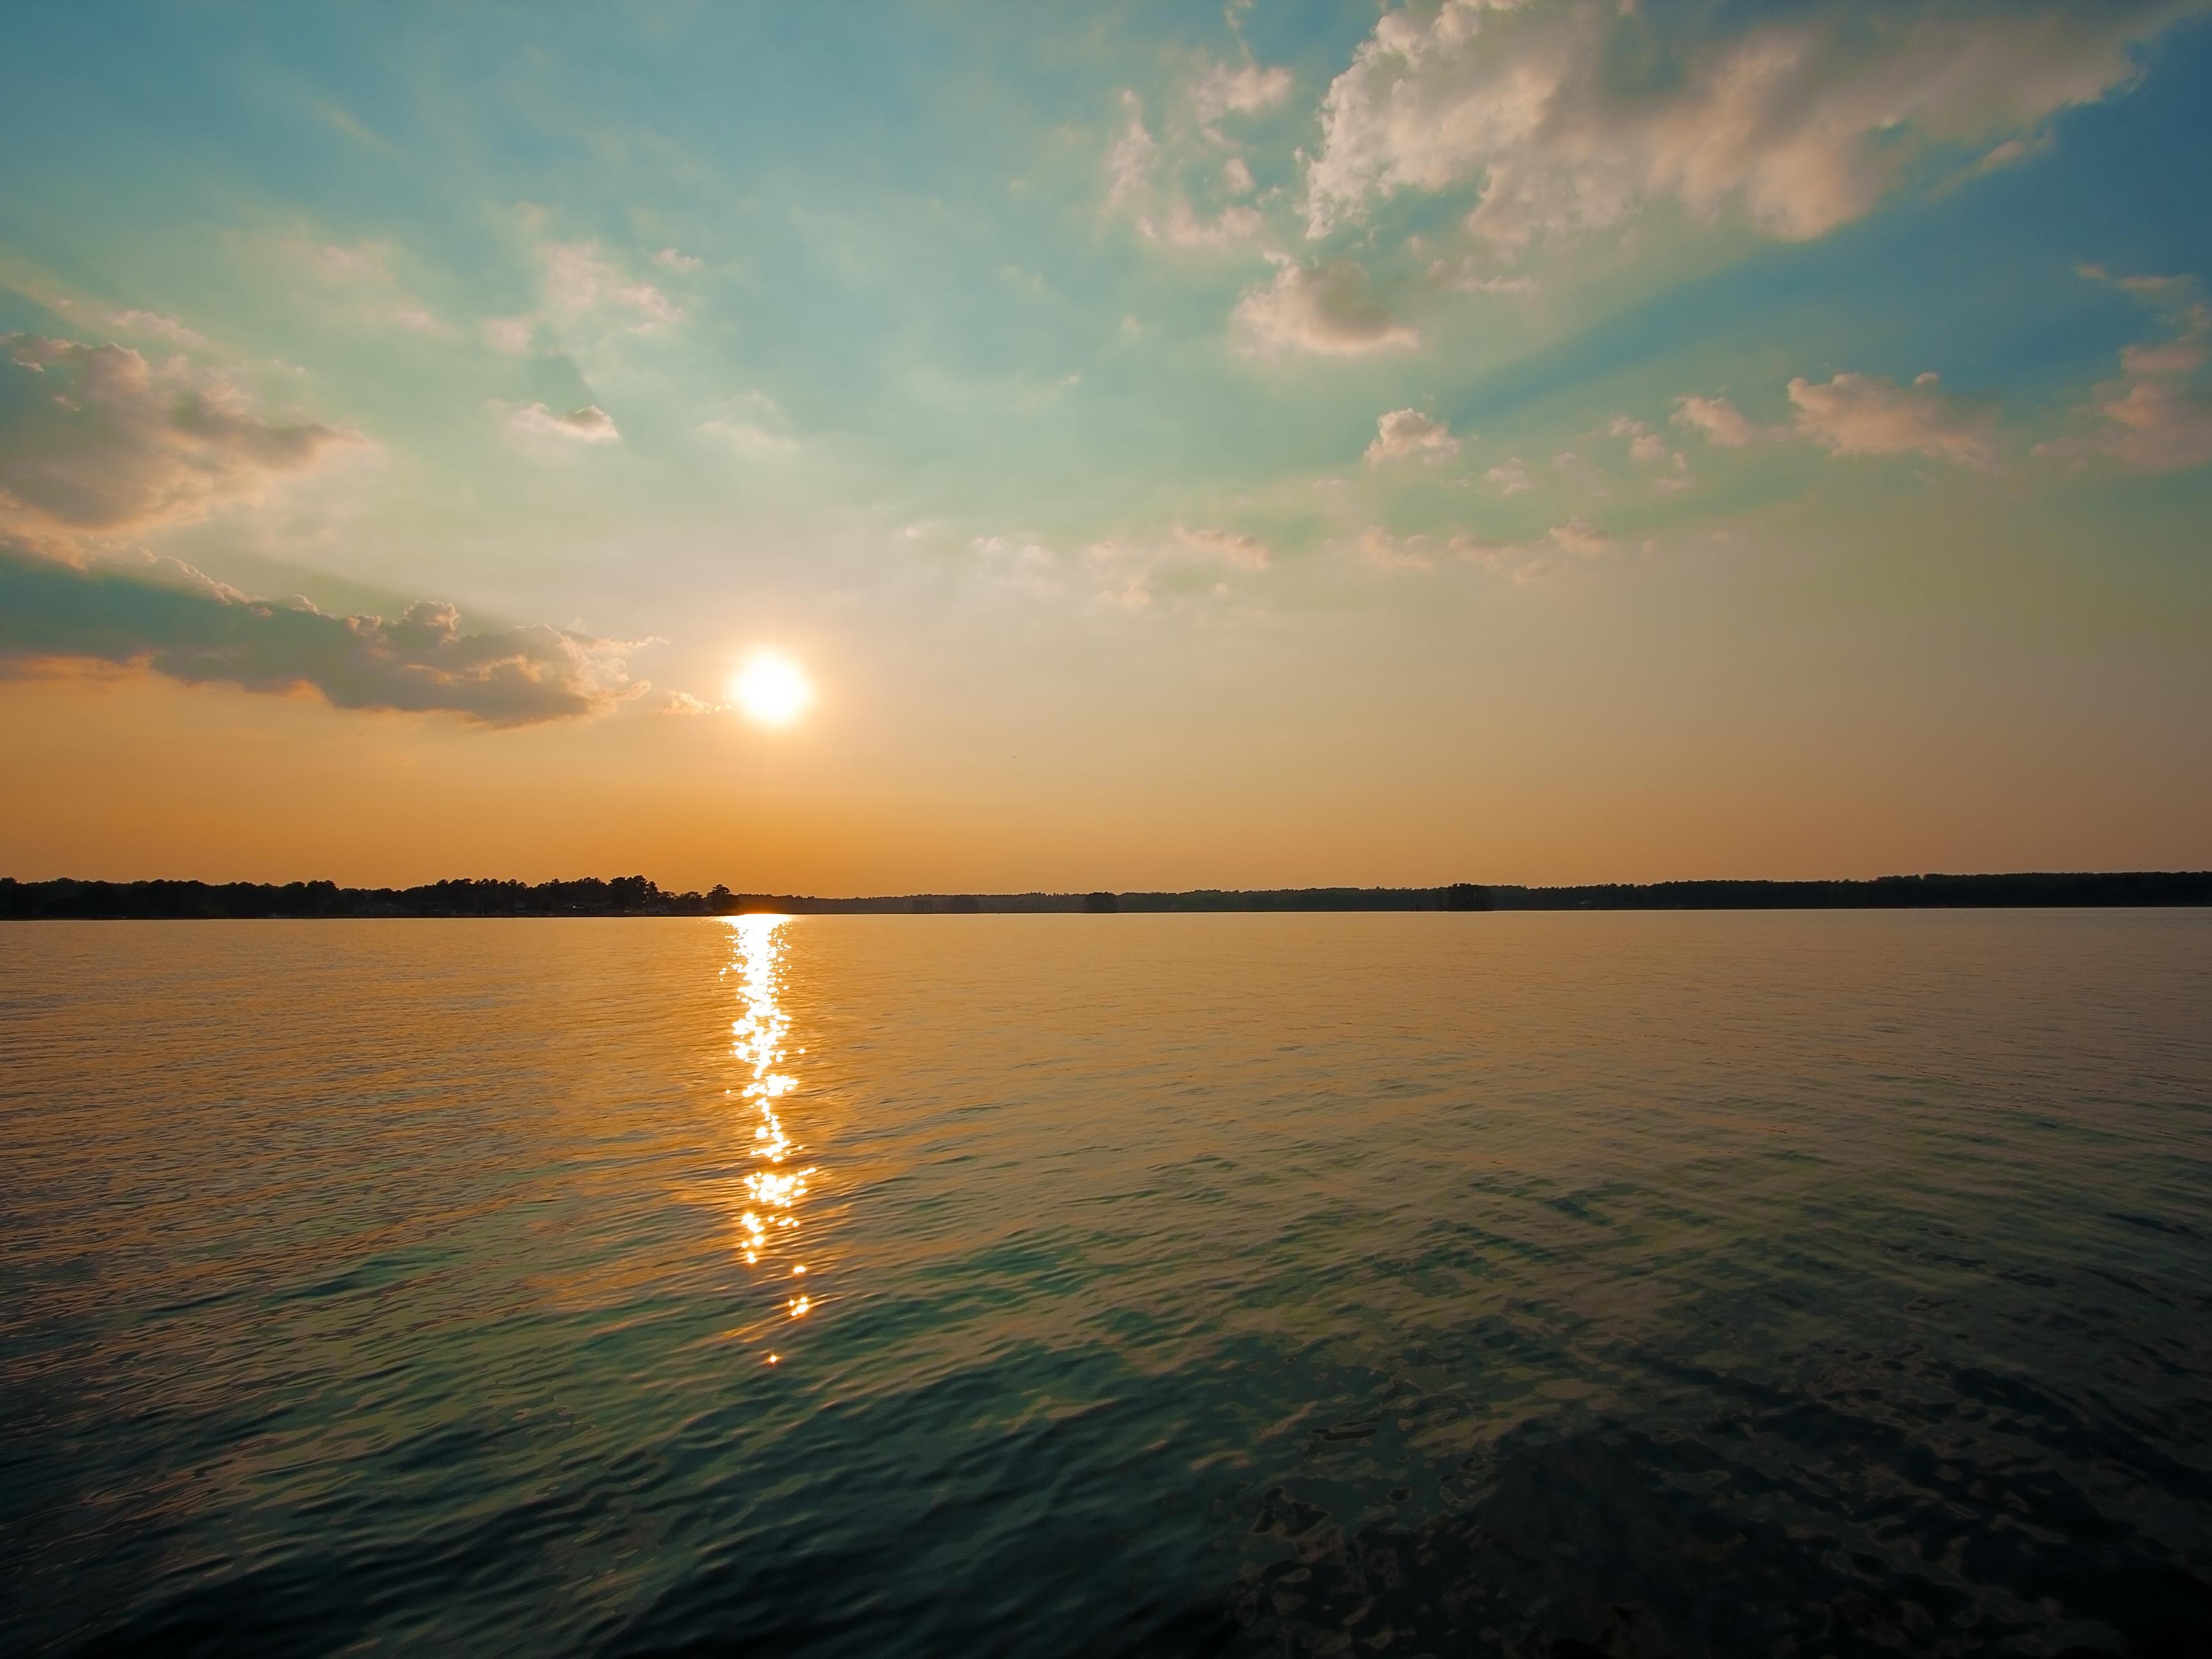 Spend a day fishing or boating on Lake Murray.